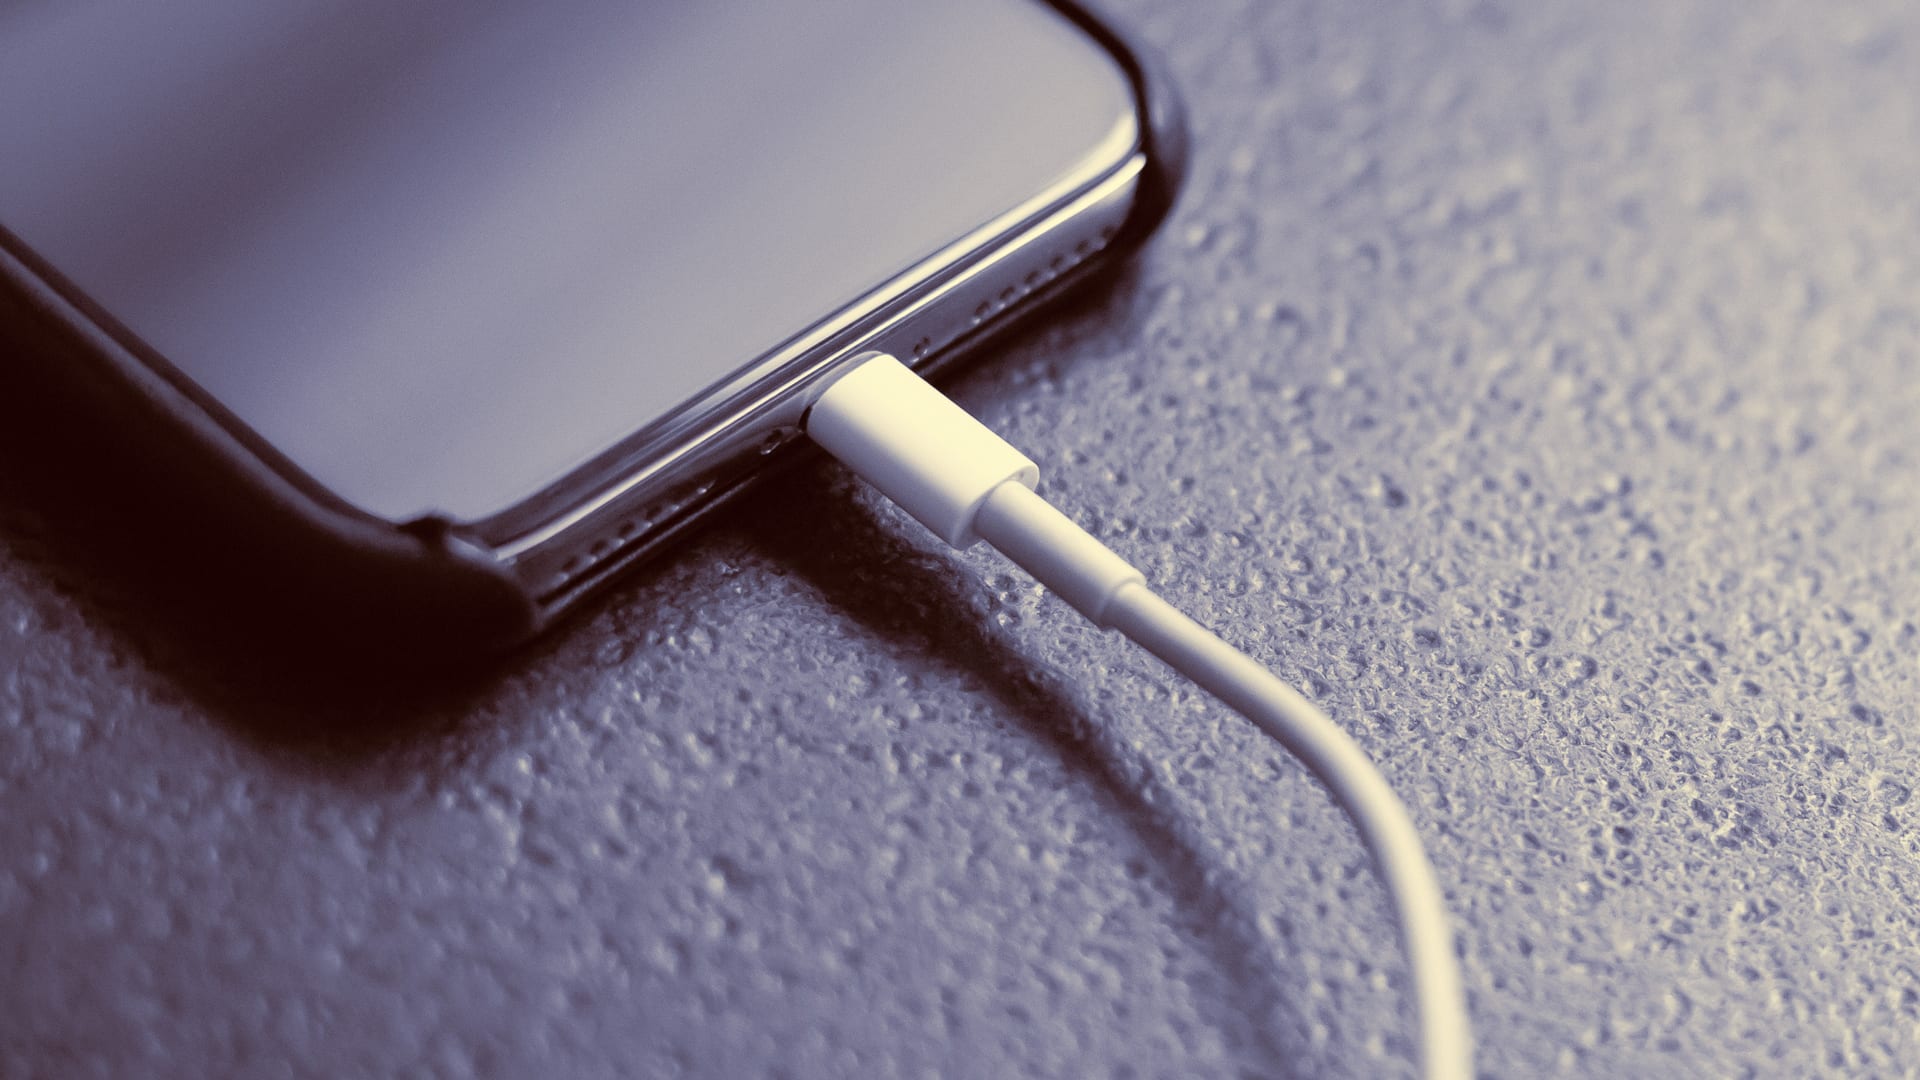 Target recall: Retail giant’s iPhone Lightning cables can catch fire